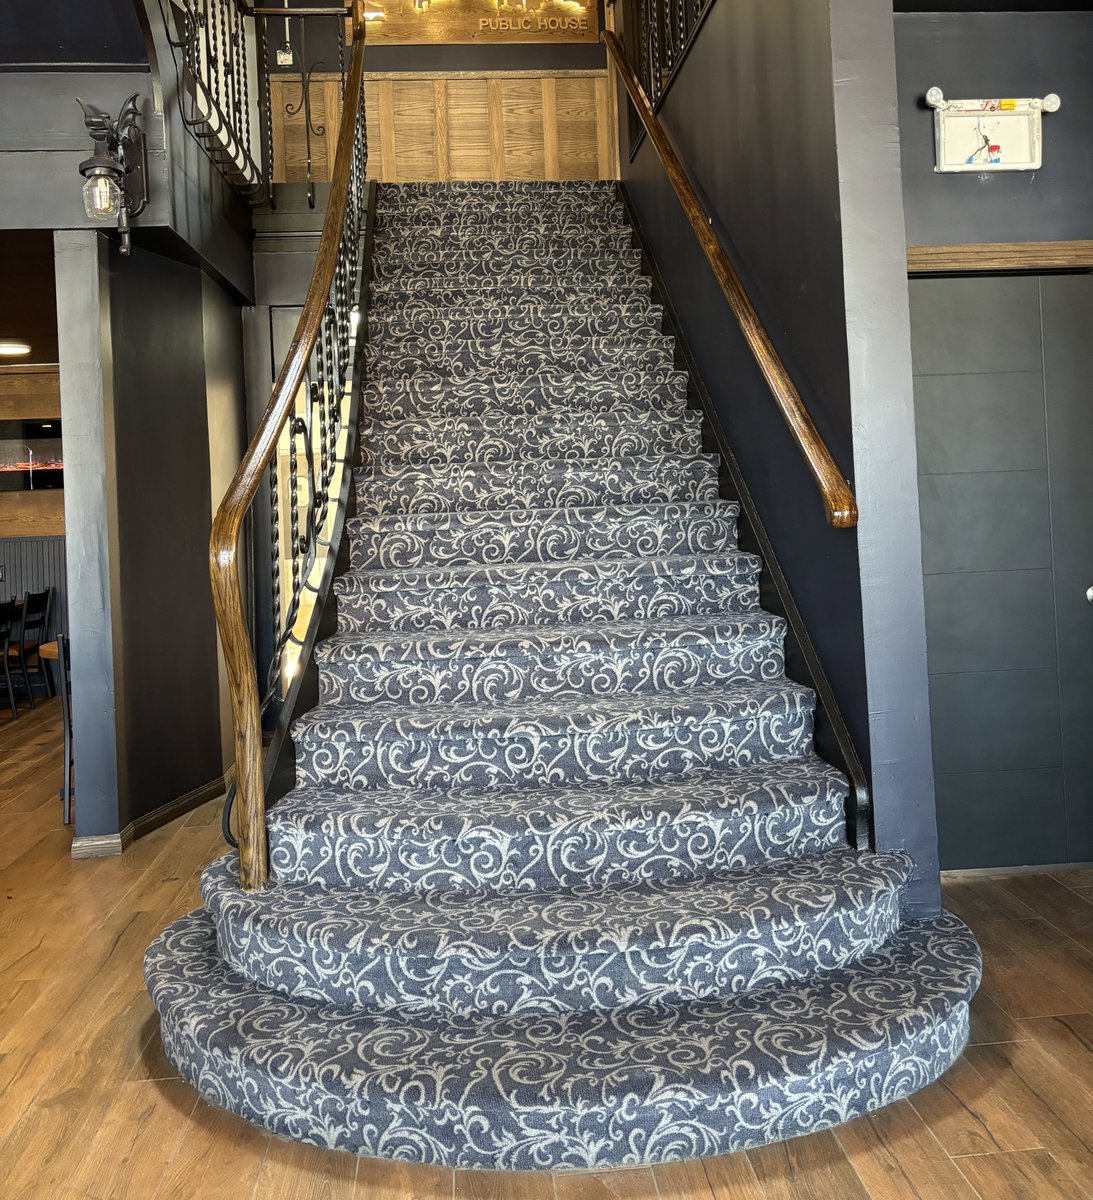 The most famous stair case in all of #yxe right here.

IYKYK